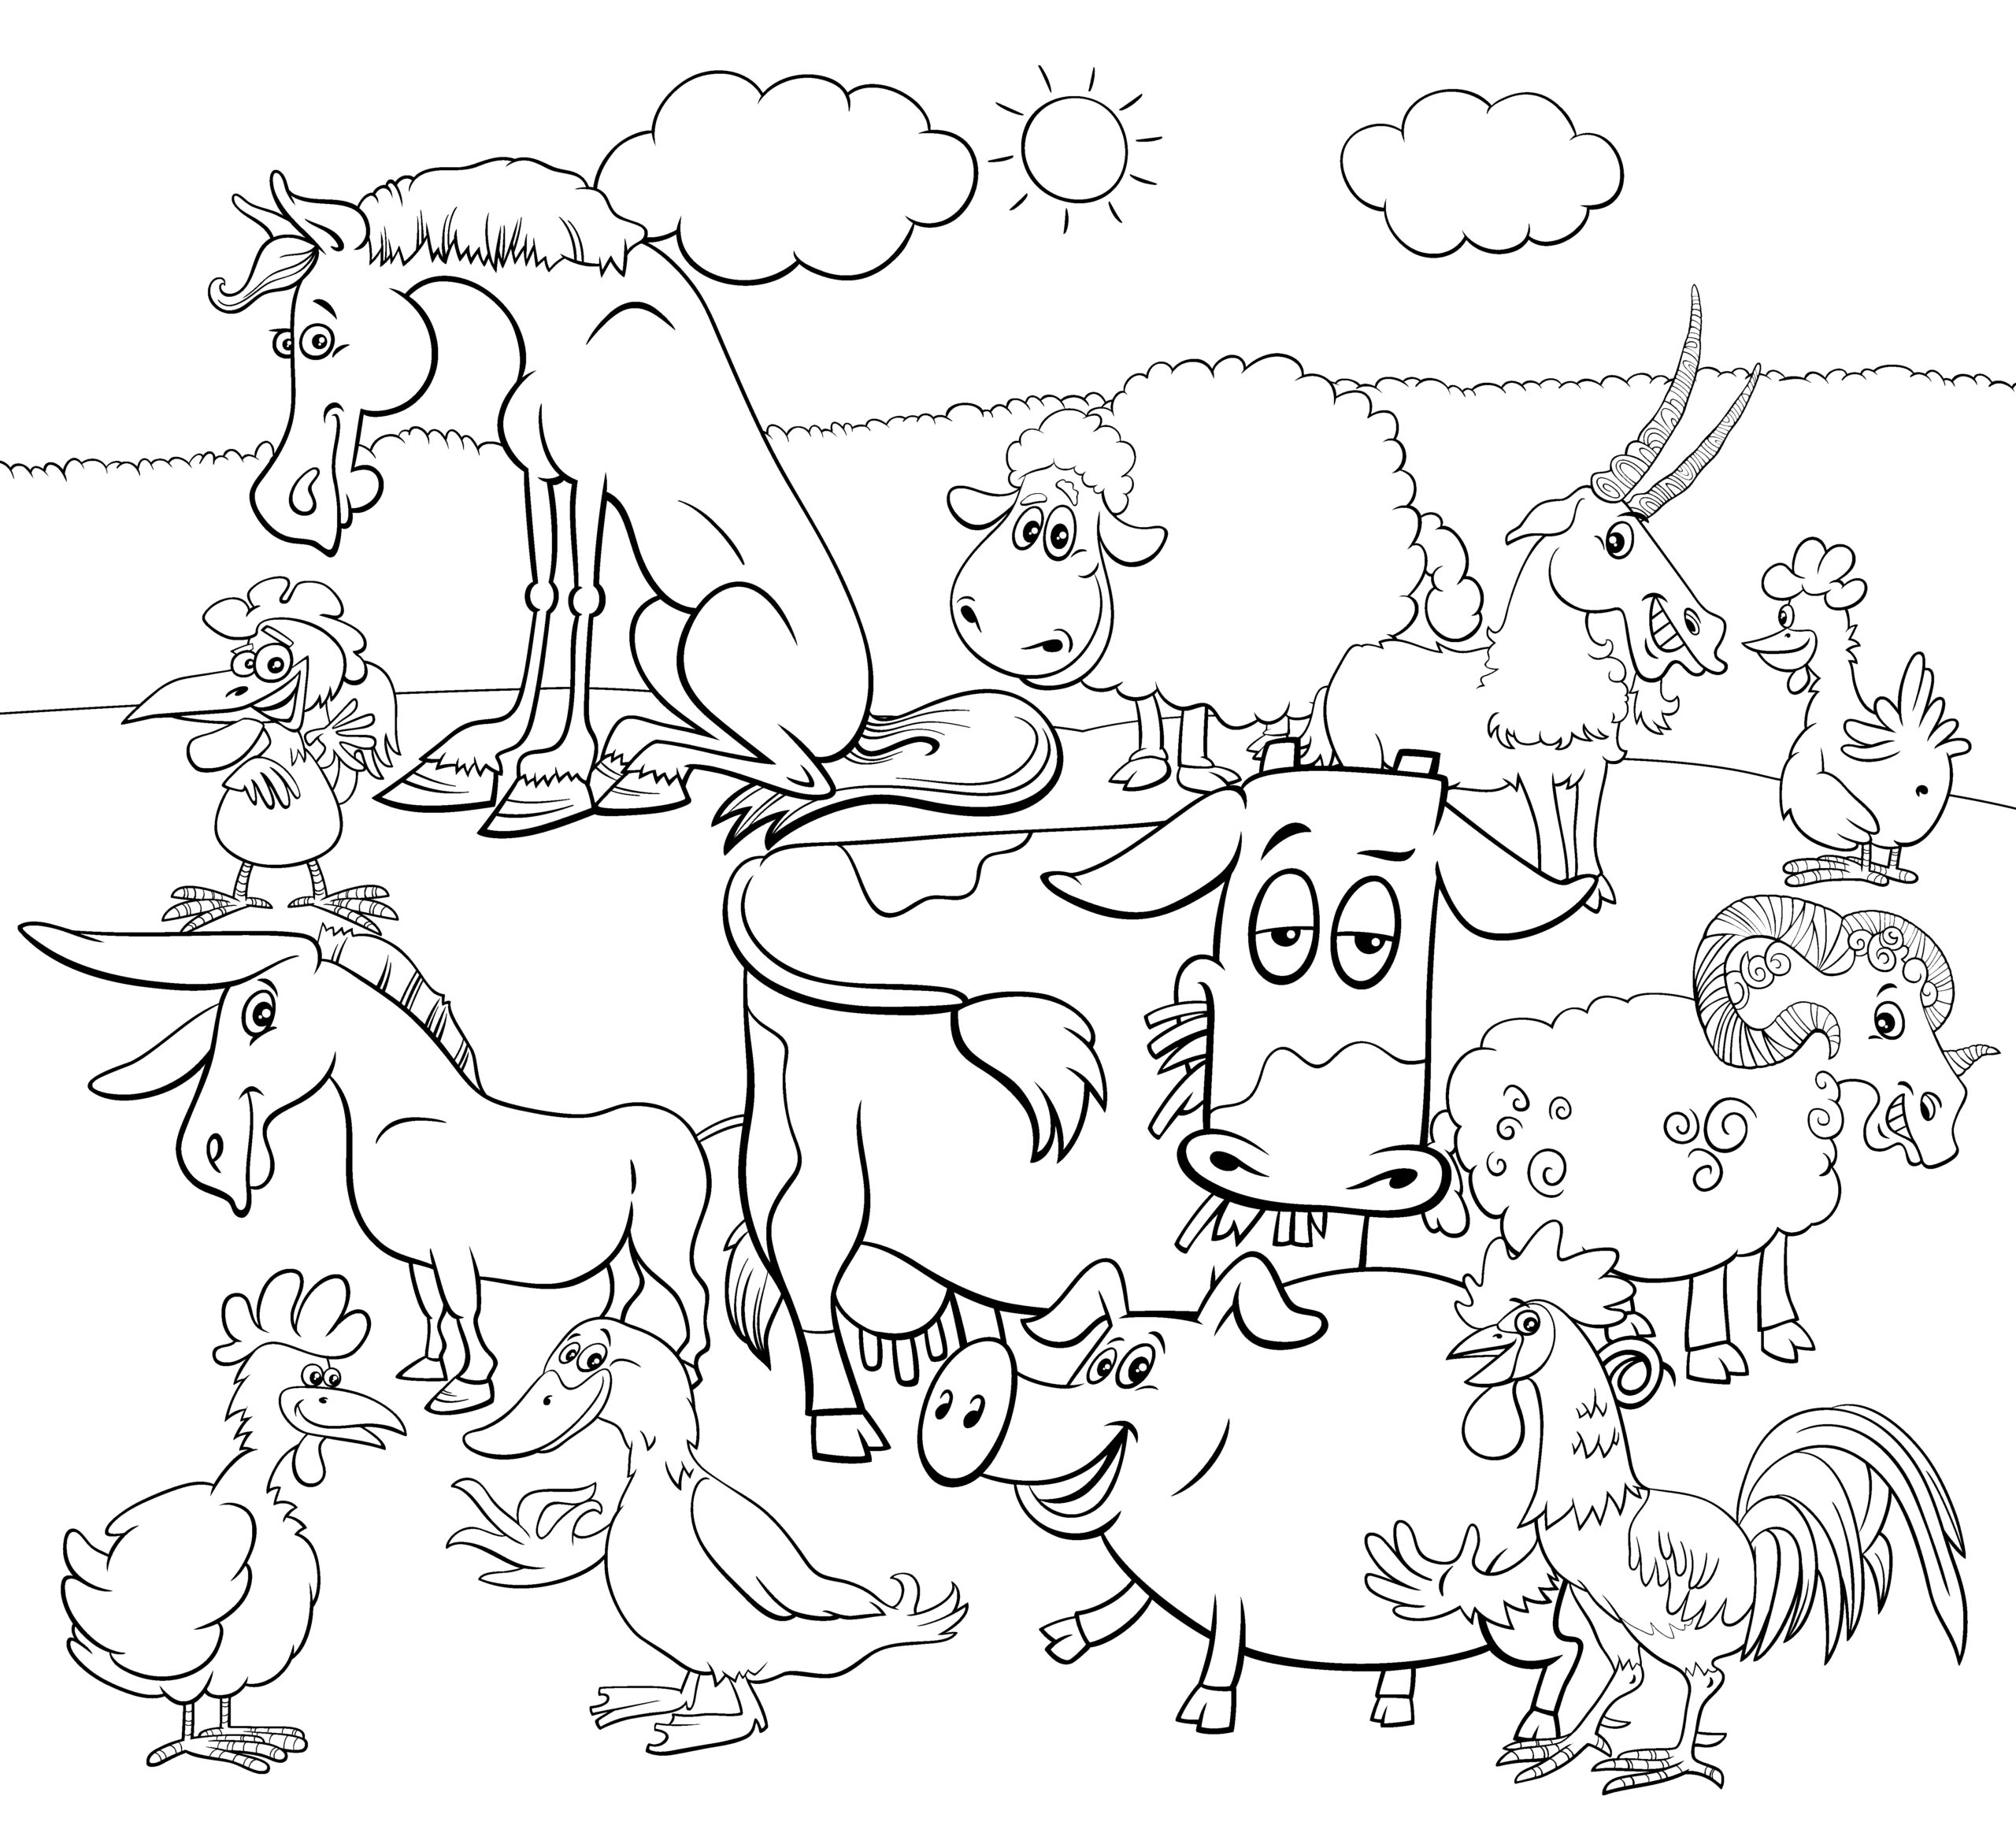 Printable Farm Coloring Pages For Kids. That Farm needs some color!